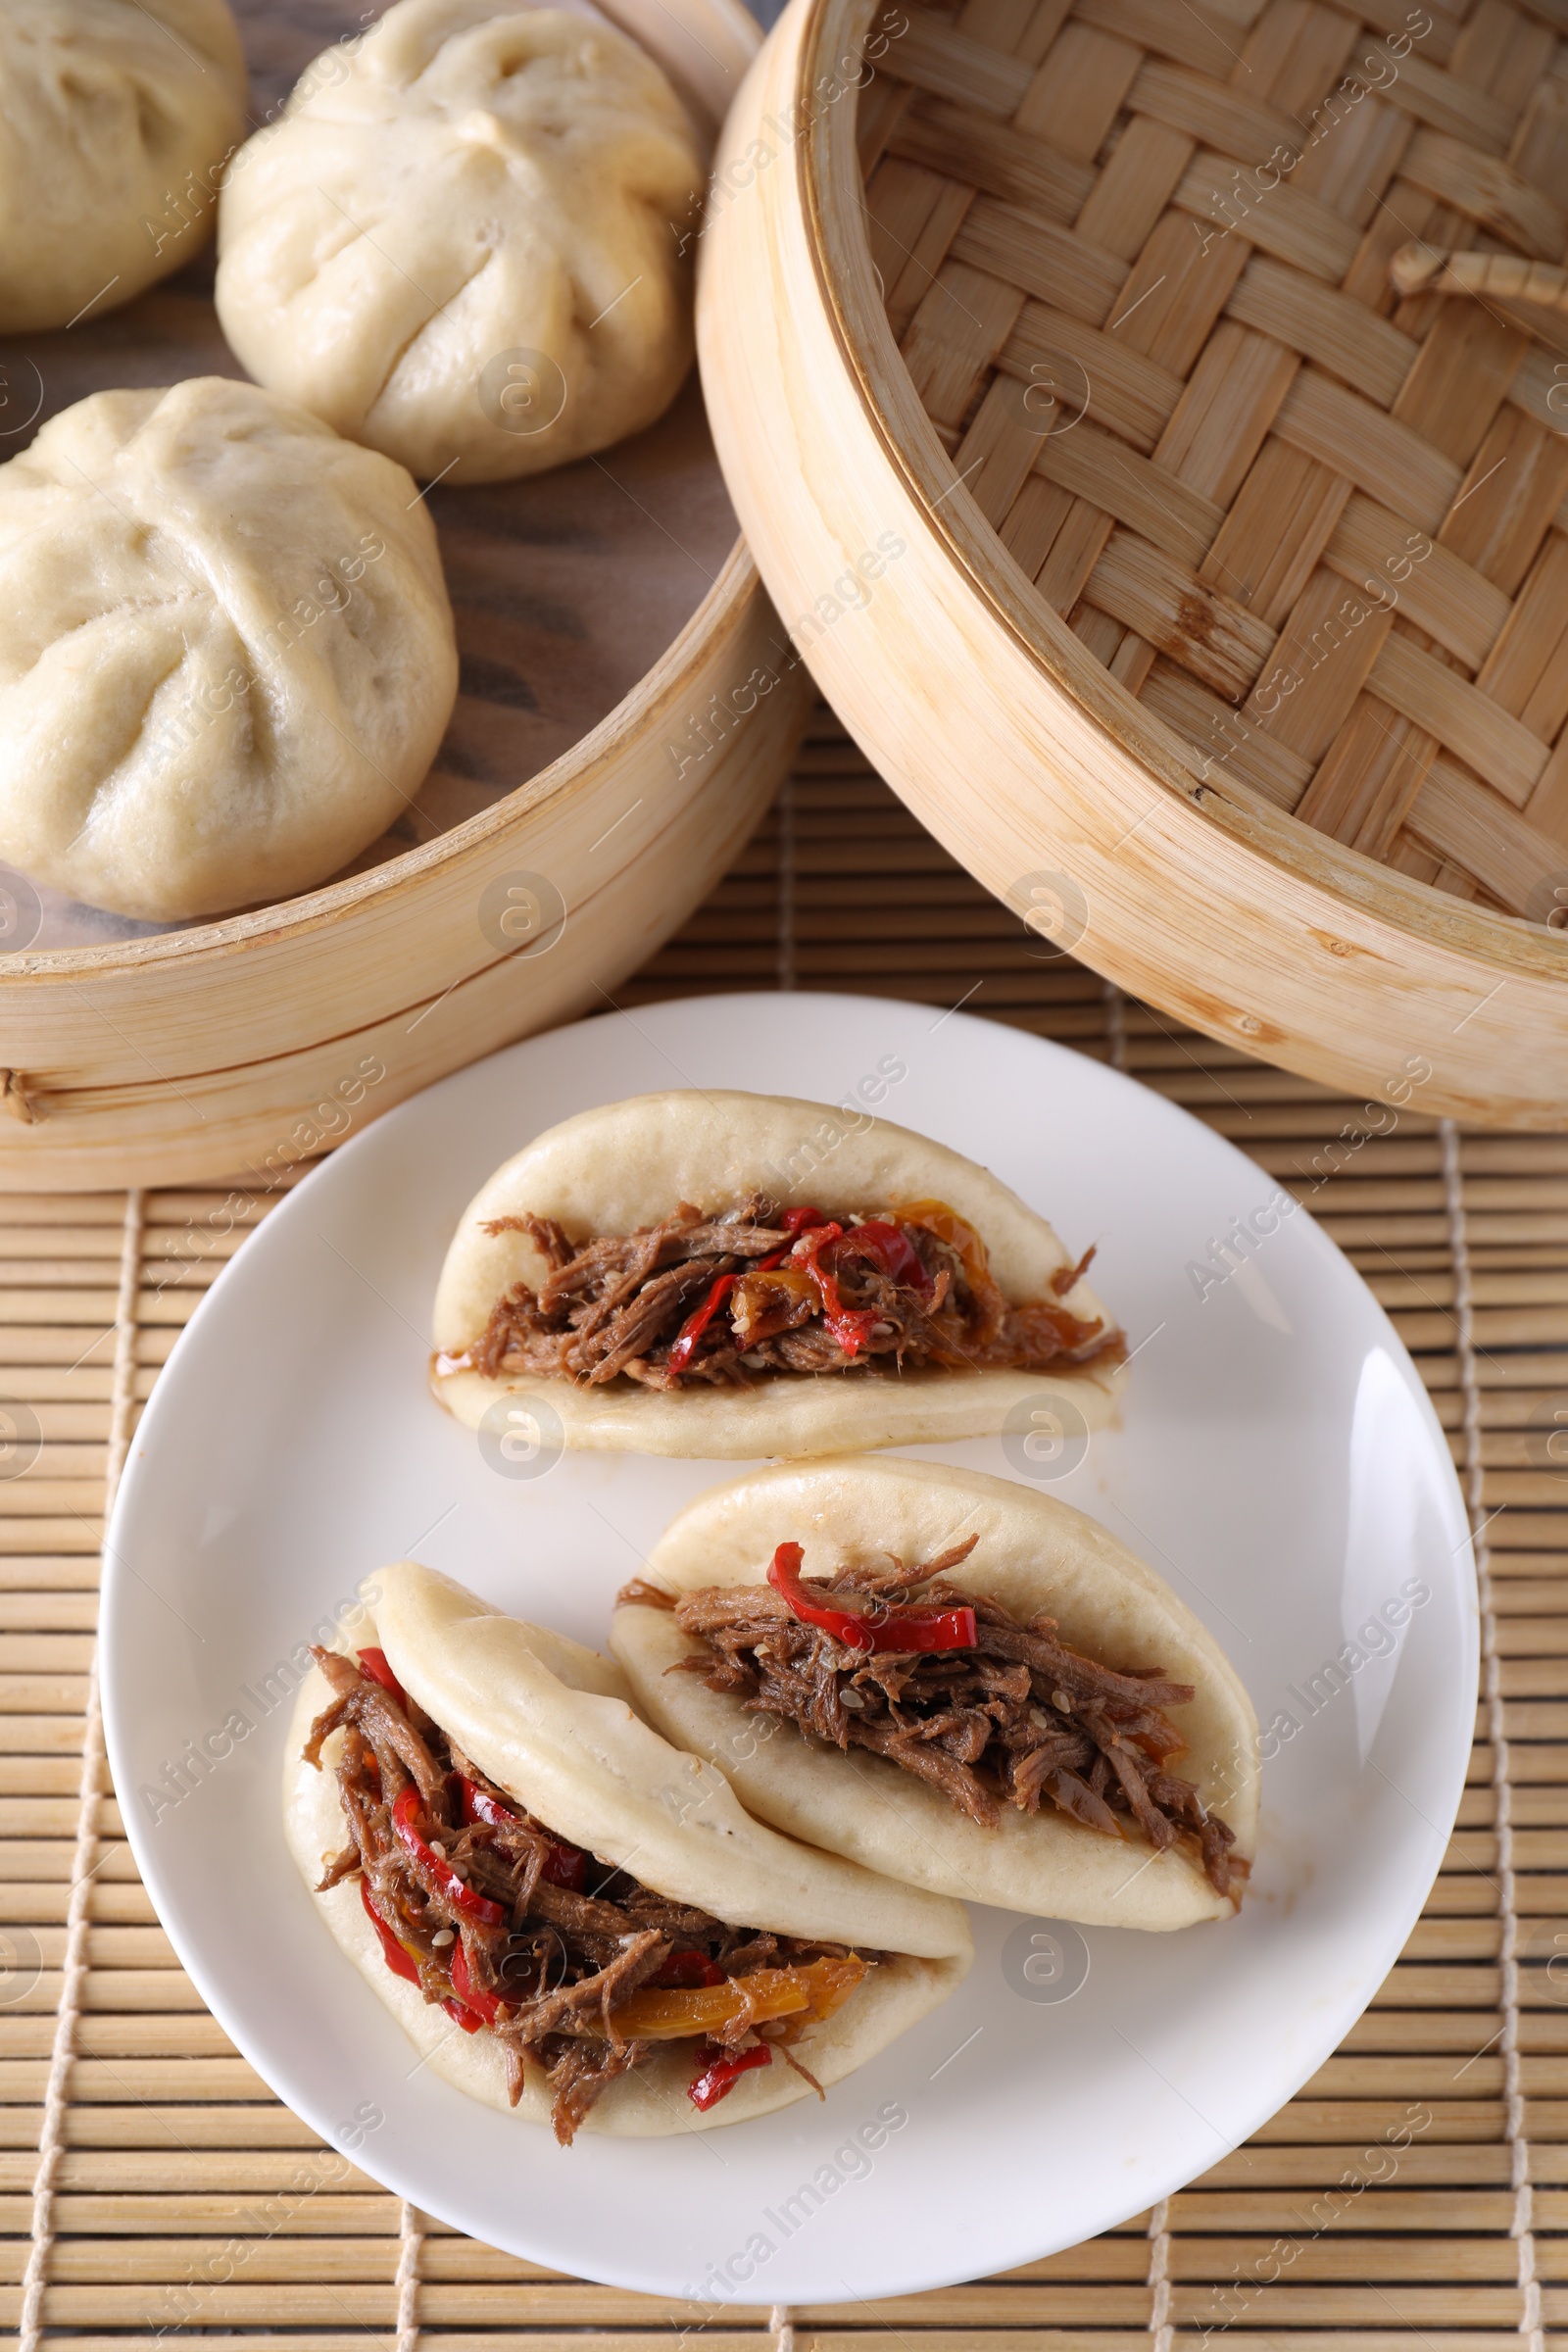 Photo of Plate with delicious gua bao (pork belly buns) and bao buns (baozi) on bamboo mat, top view